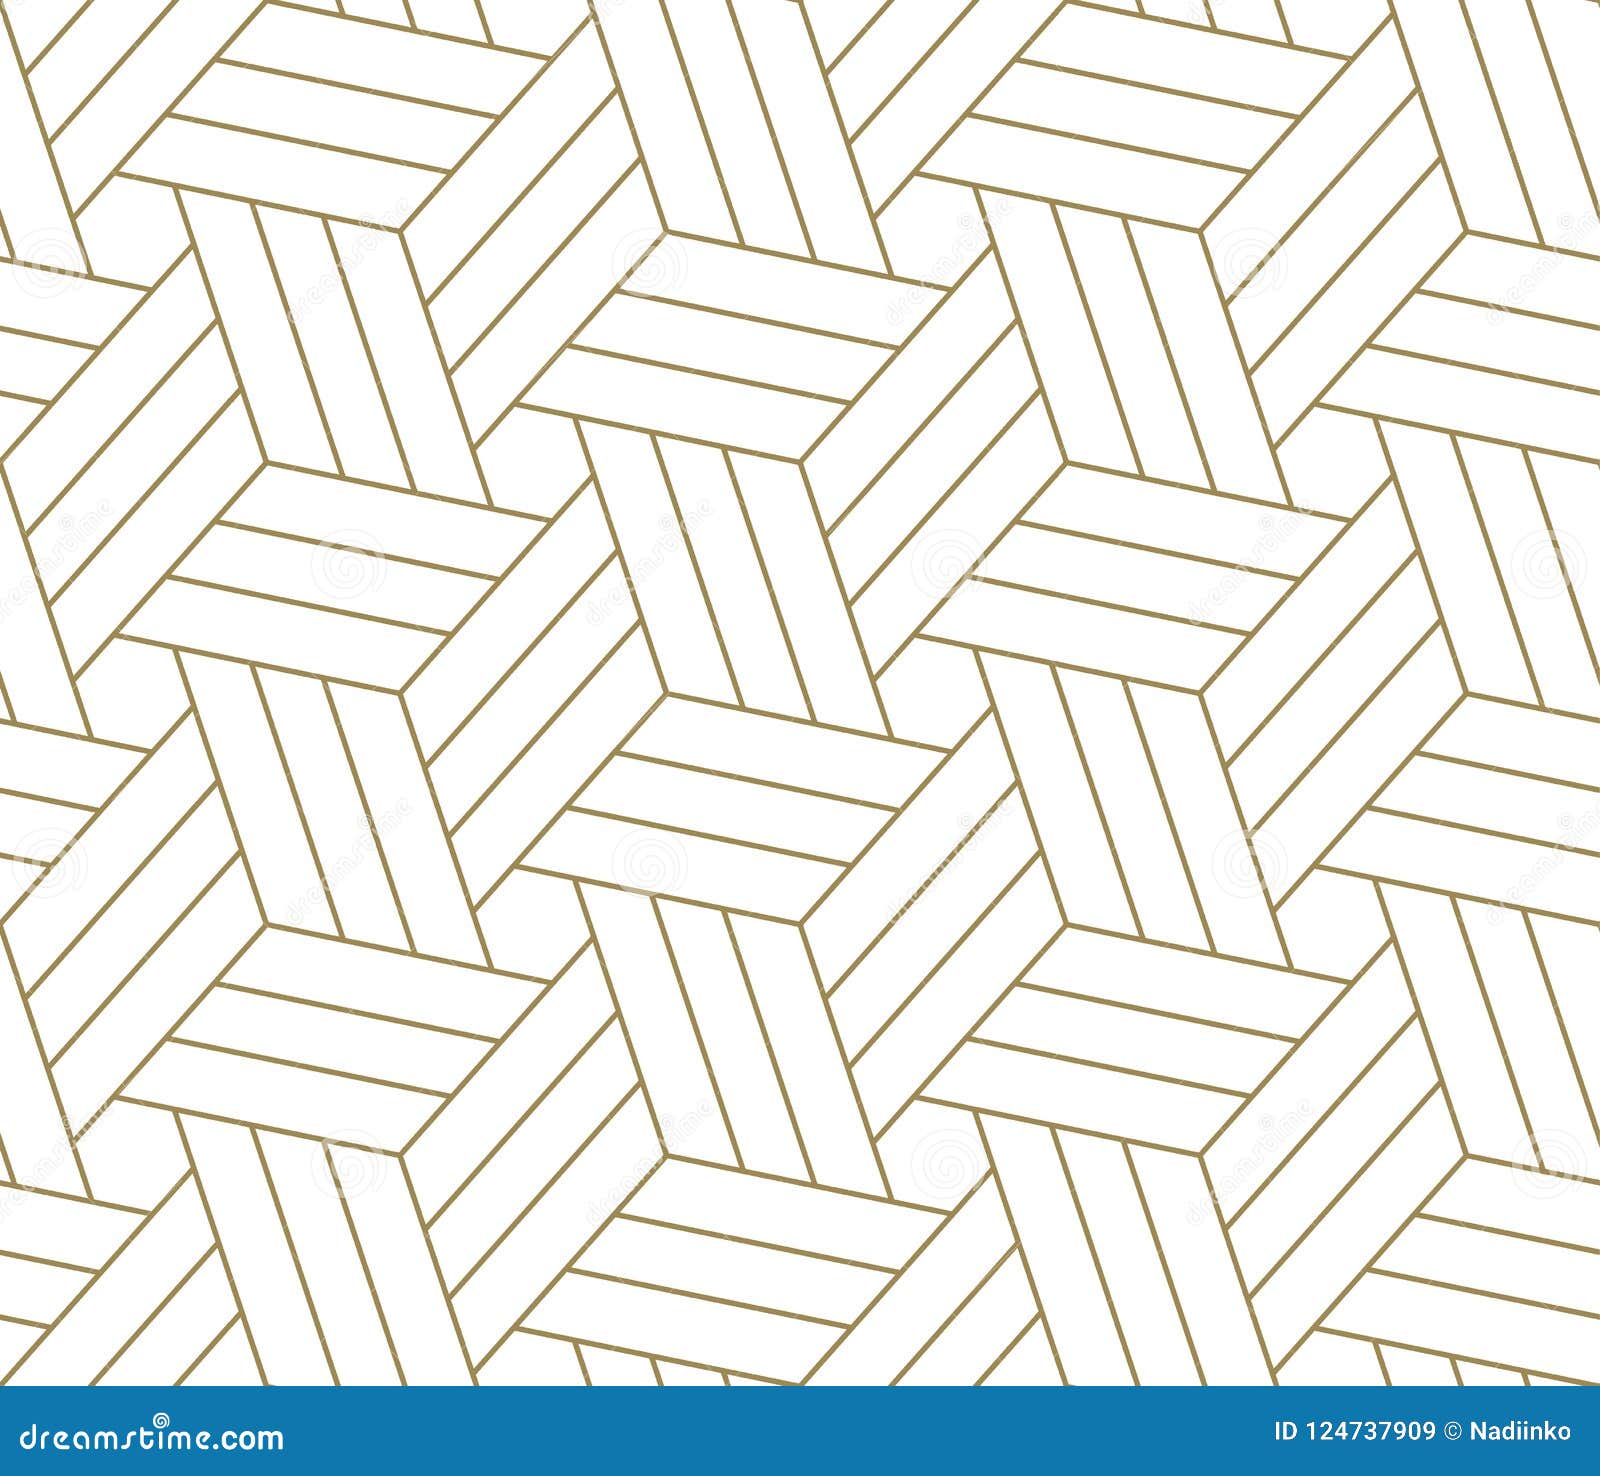 https://thumbs.dreamstime.com/z/modern-simple-geometric-vector-seamless-pattern-gold-line-texture-white-background-light-abstract-wallpaper-modern-simple-124737909.jpg